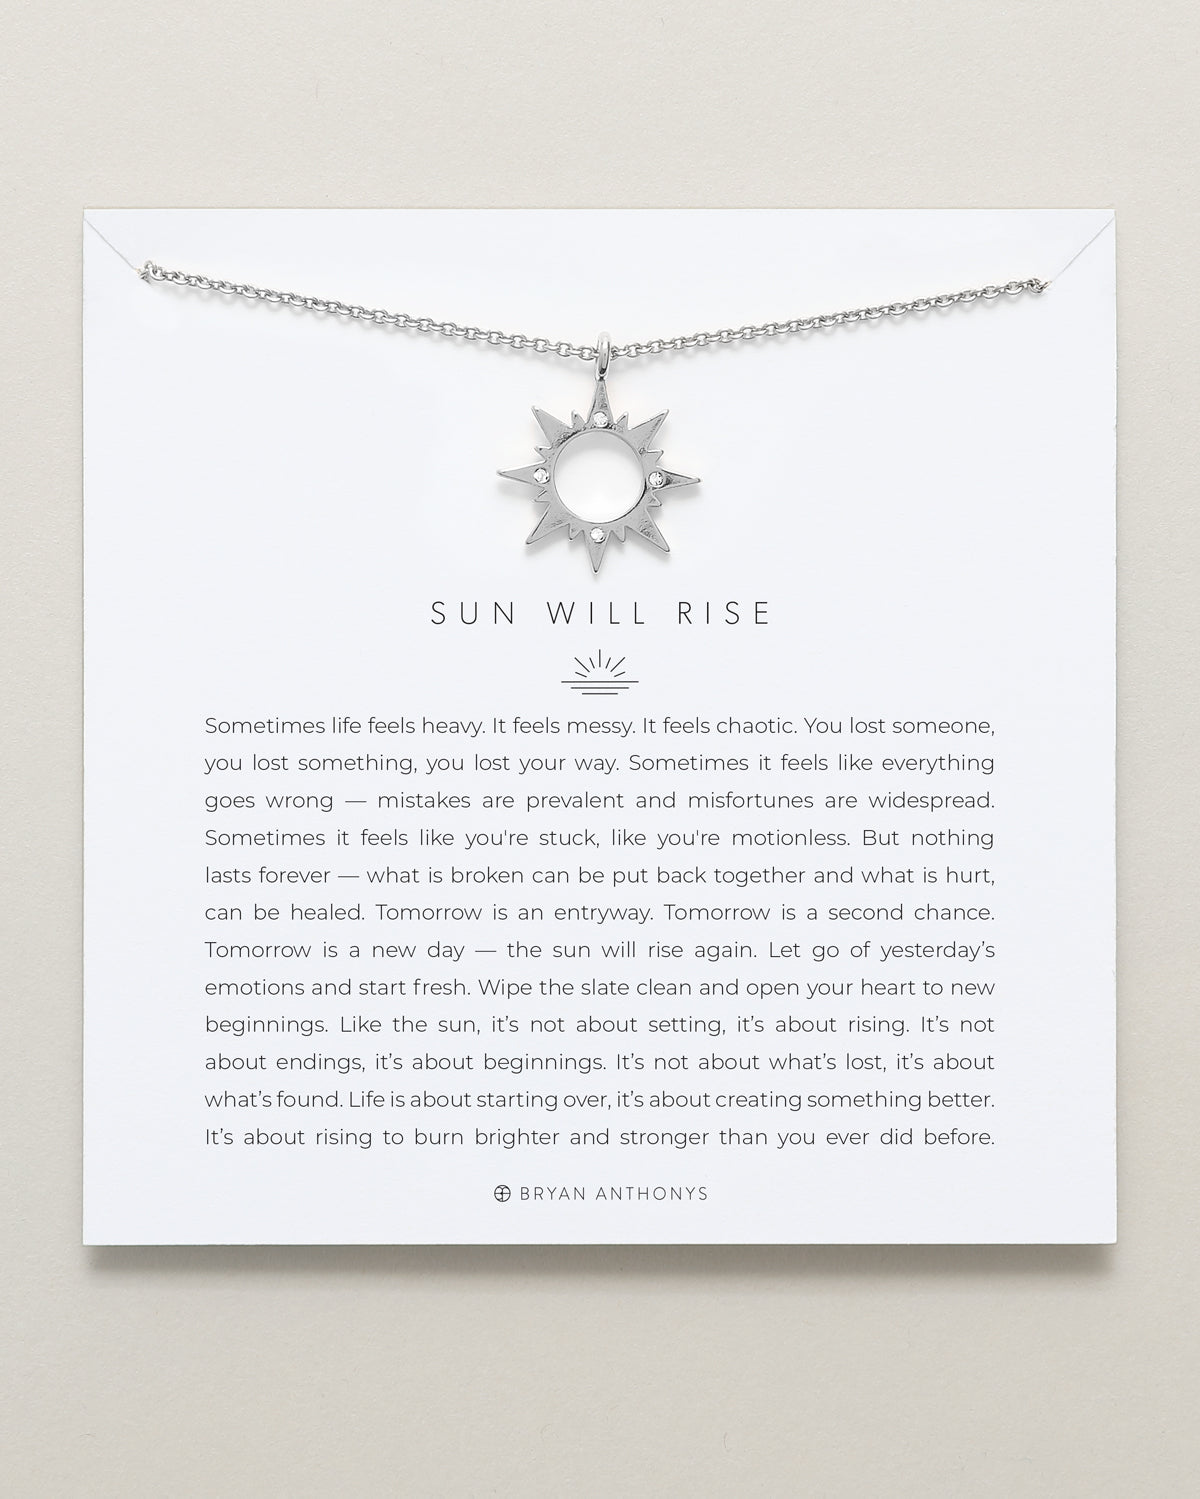 Bryan Anthonys dainty sun will rise necklace silver